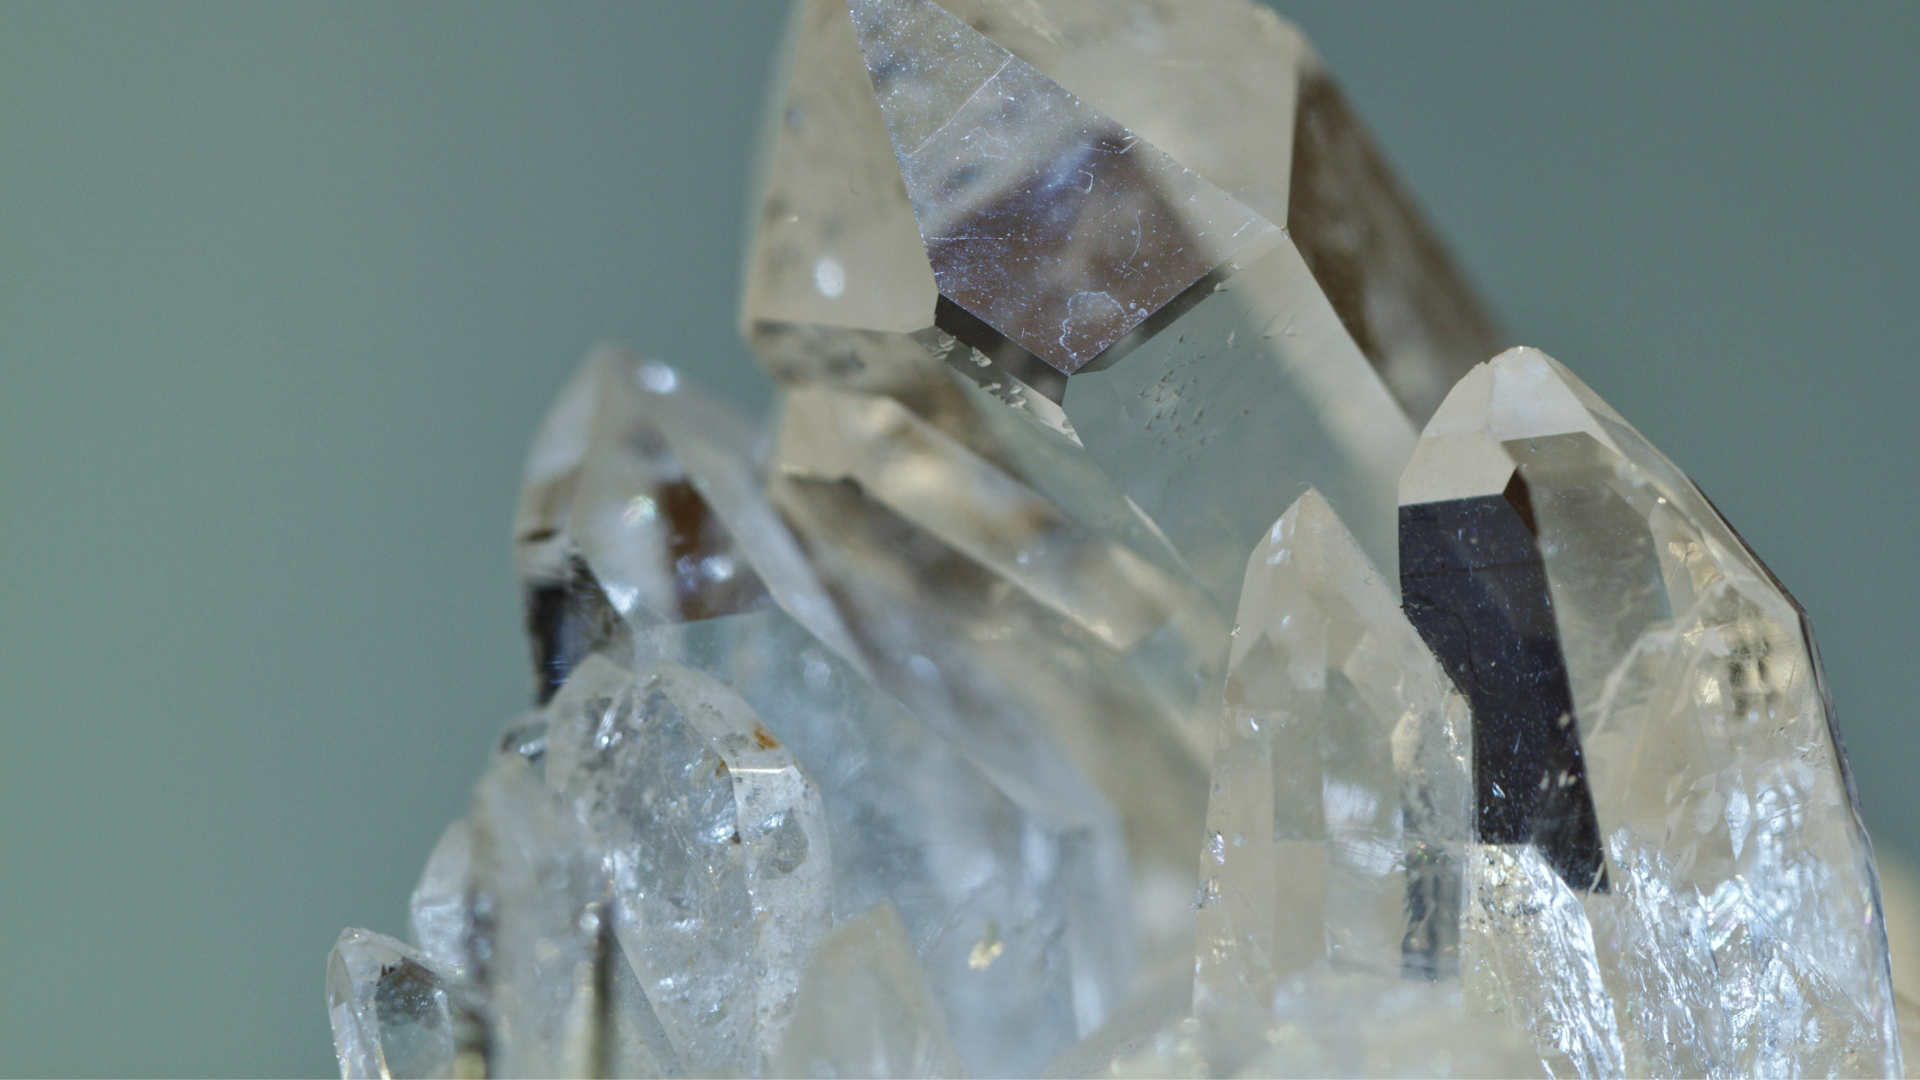 Ethically sourced crystals with Nicholas Pearson. How can we find crystals that are mined ethically, conscious of the earth and the miners involved? Nicholas shares his perspective in episode 15 of the For Animals For Earth Podcast.